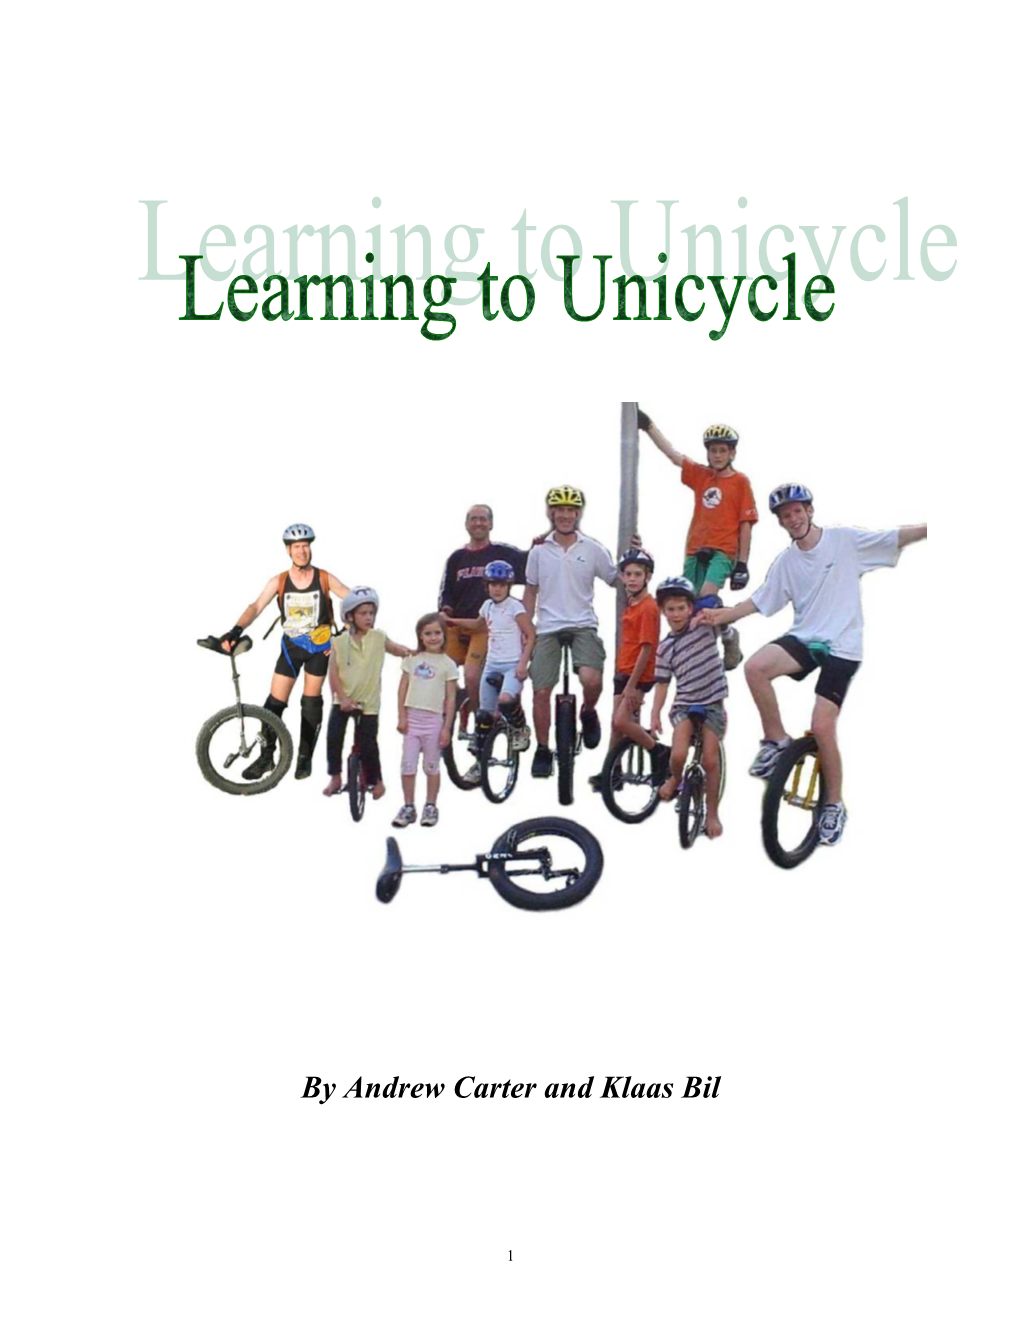 Learning to Unicycle